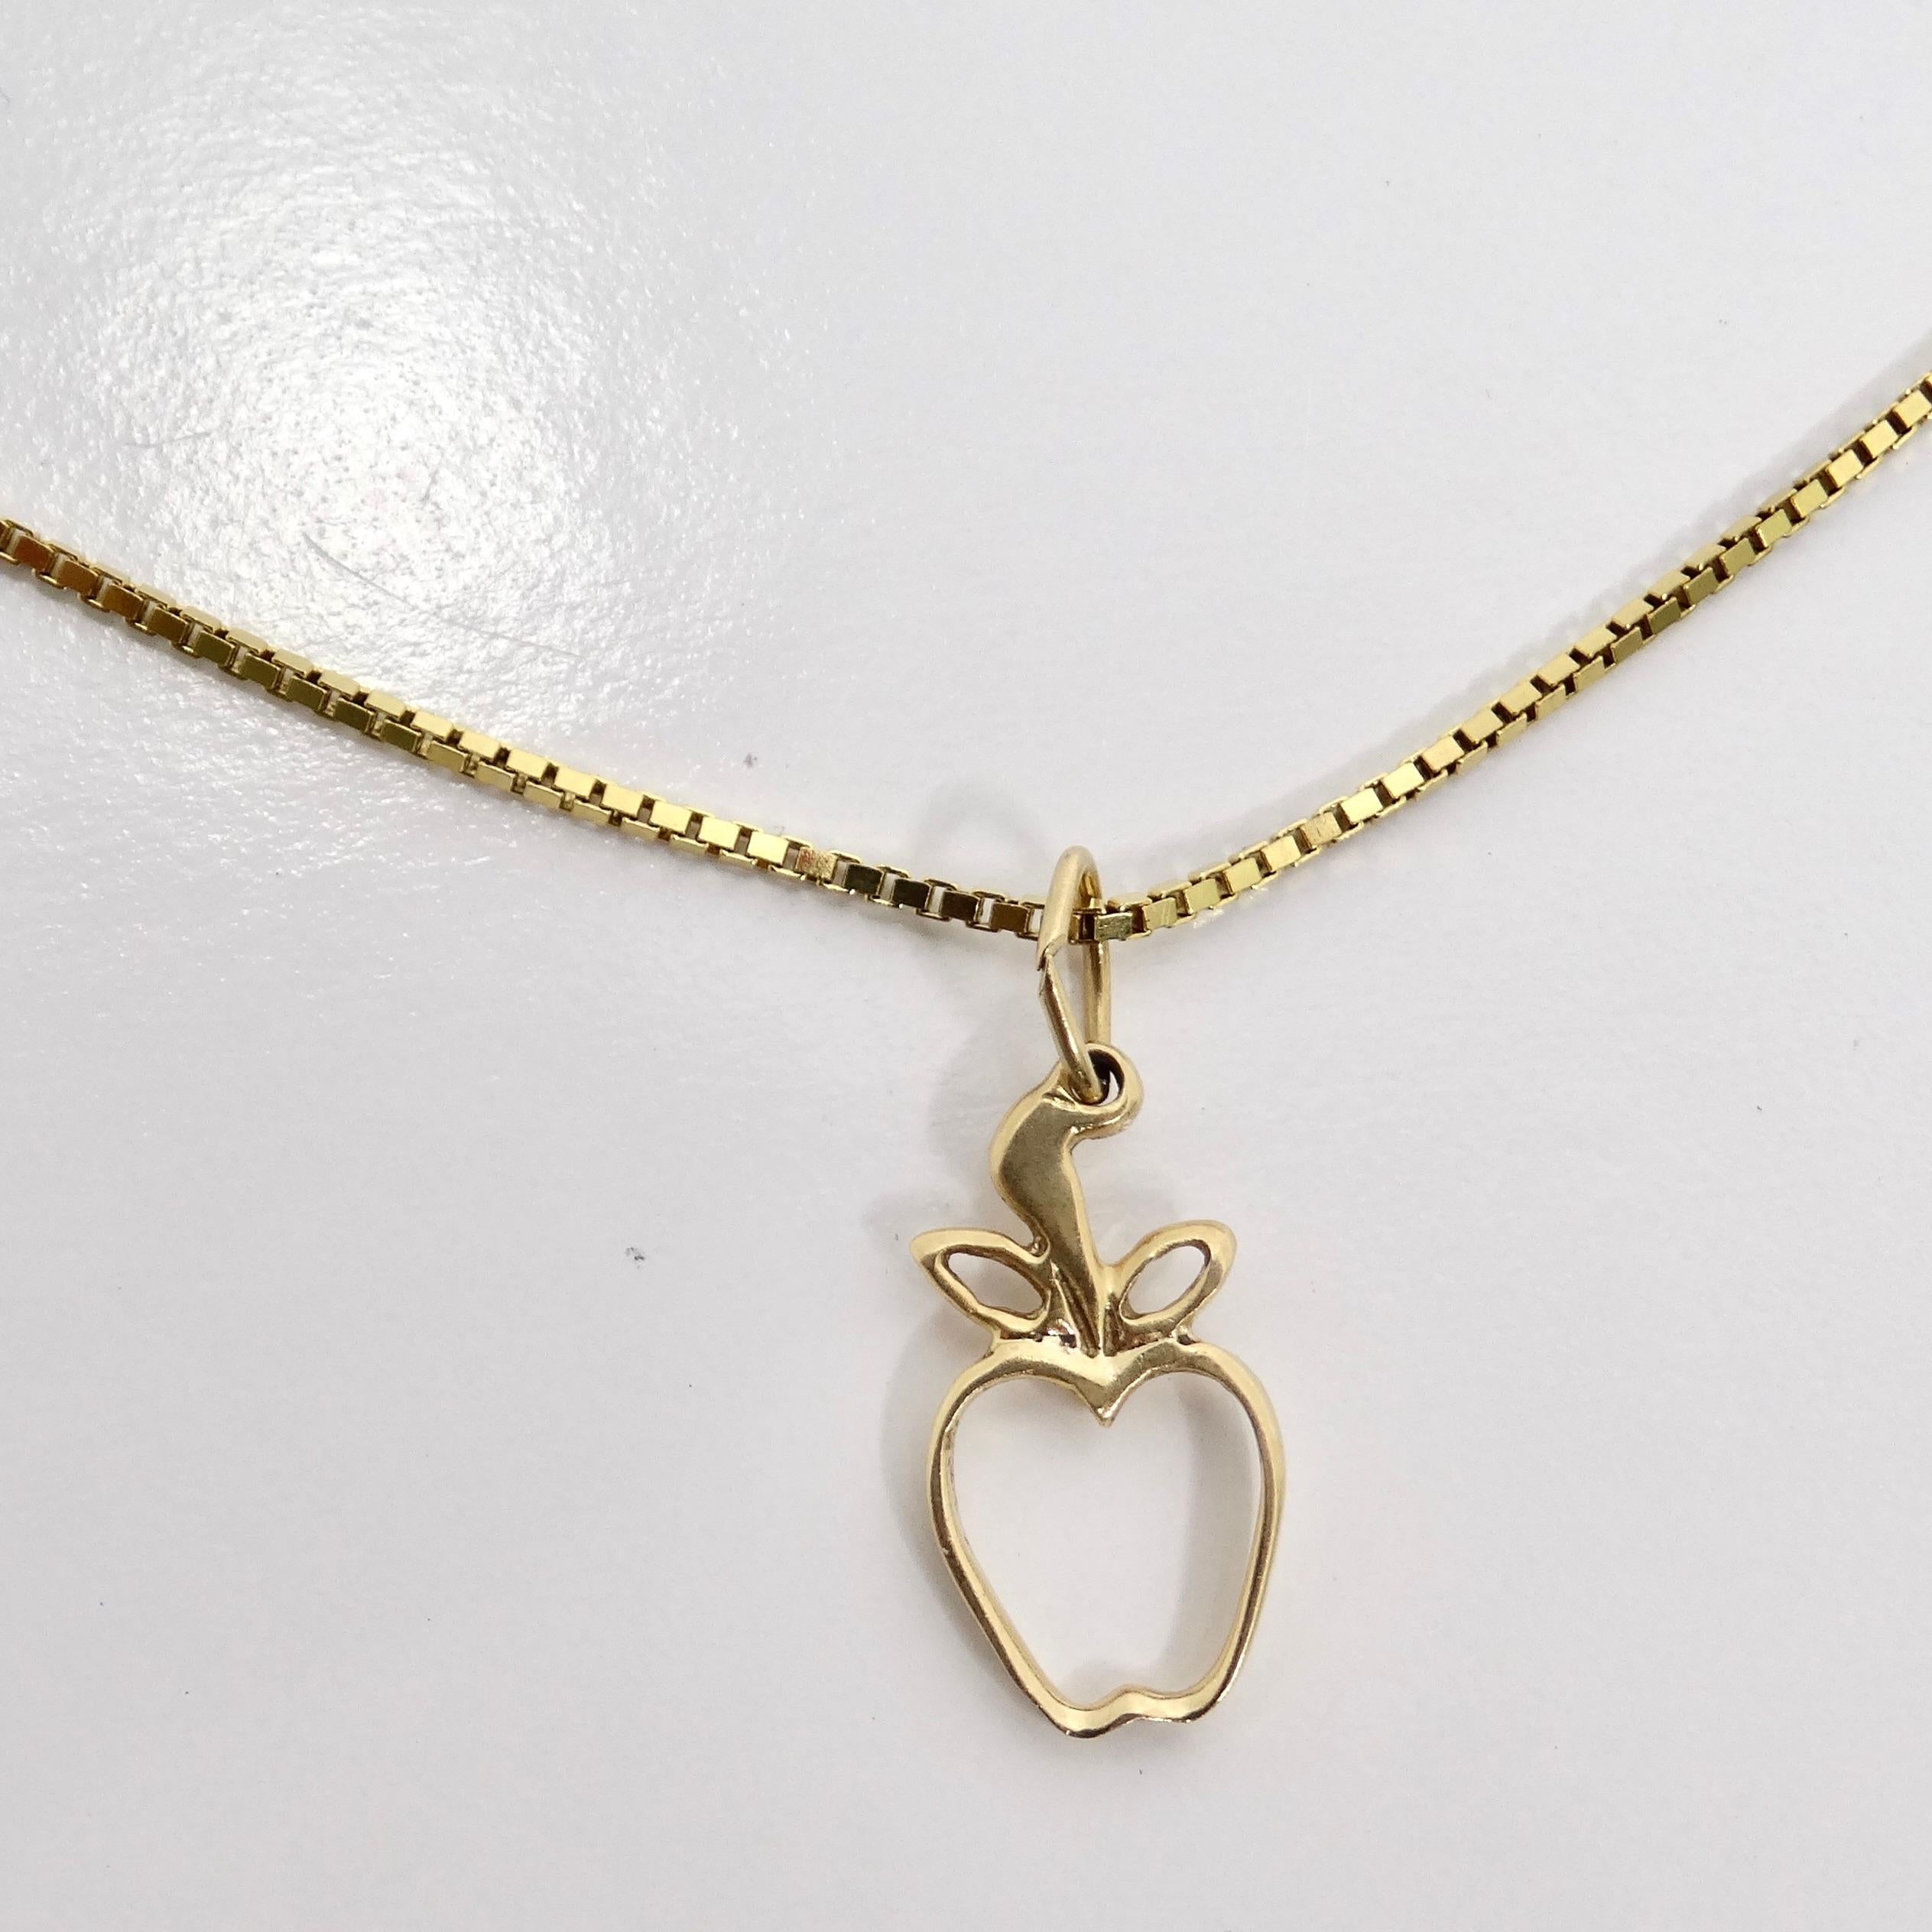 Introducing the 14K Solid Gold Apple Pendant Necklace, a charming and timeless piece that adds a touch of whimsy to your everyday look. Crafted from dainty 14K yellow gold, this necklace features an adorable pendant in the shape of an apple, exuding